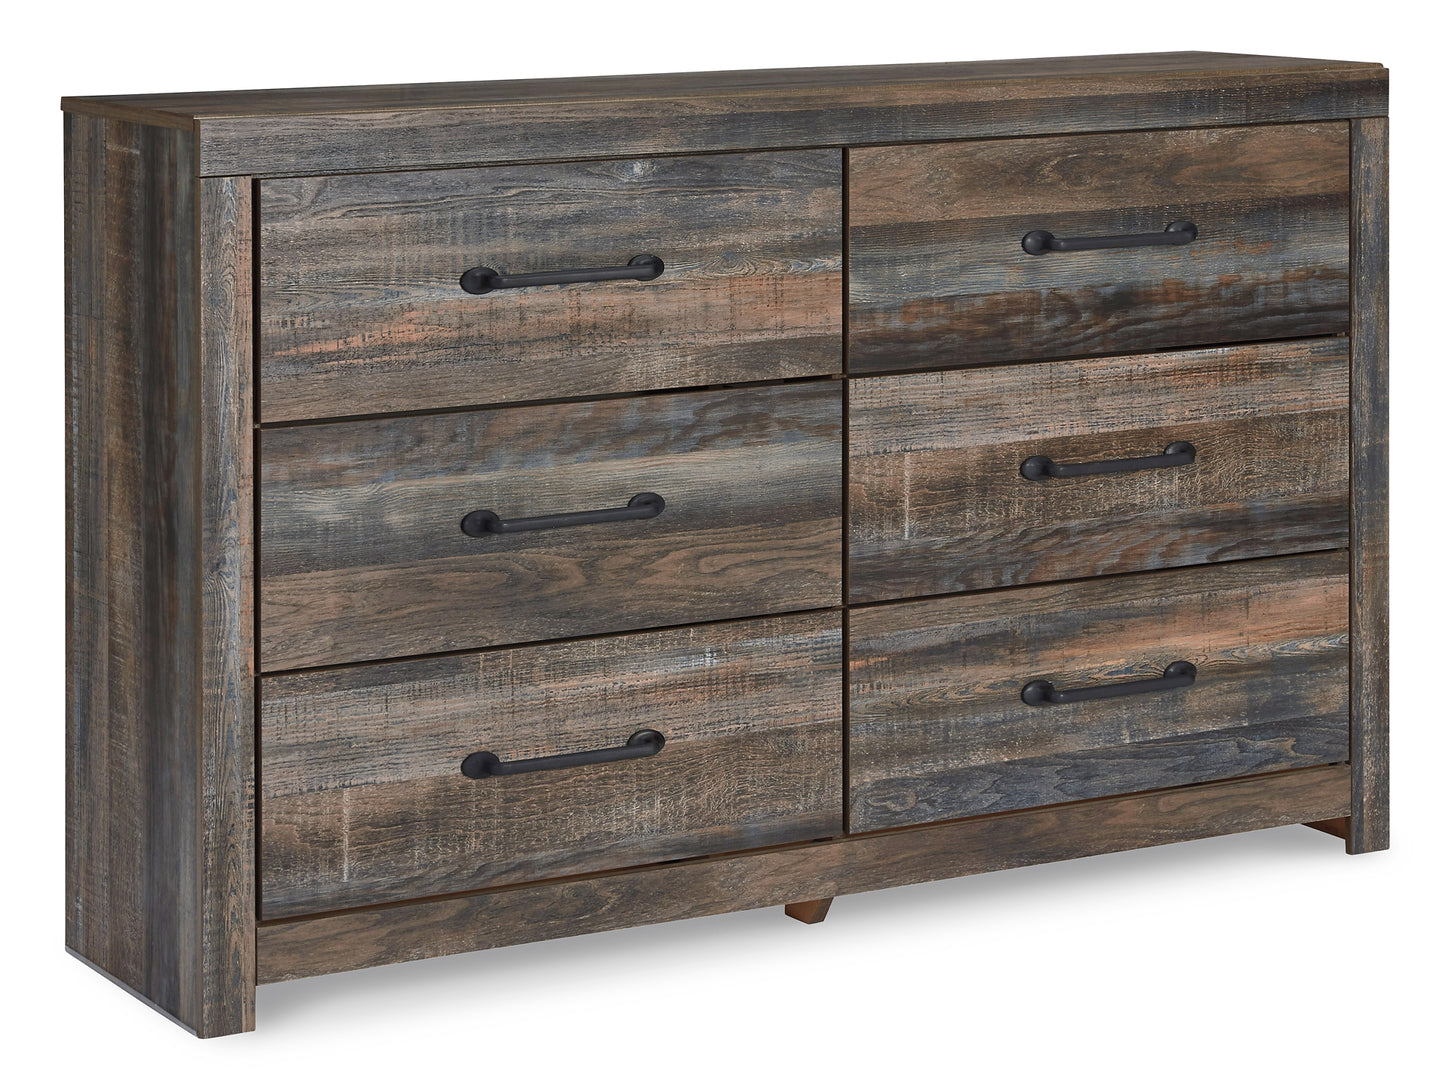 Drystan King Panel Bed with 4 Storage Drawers with Dresser JB's Furniture  Home Furniture, Home Decor, Furniture Store